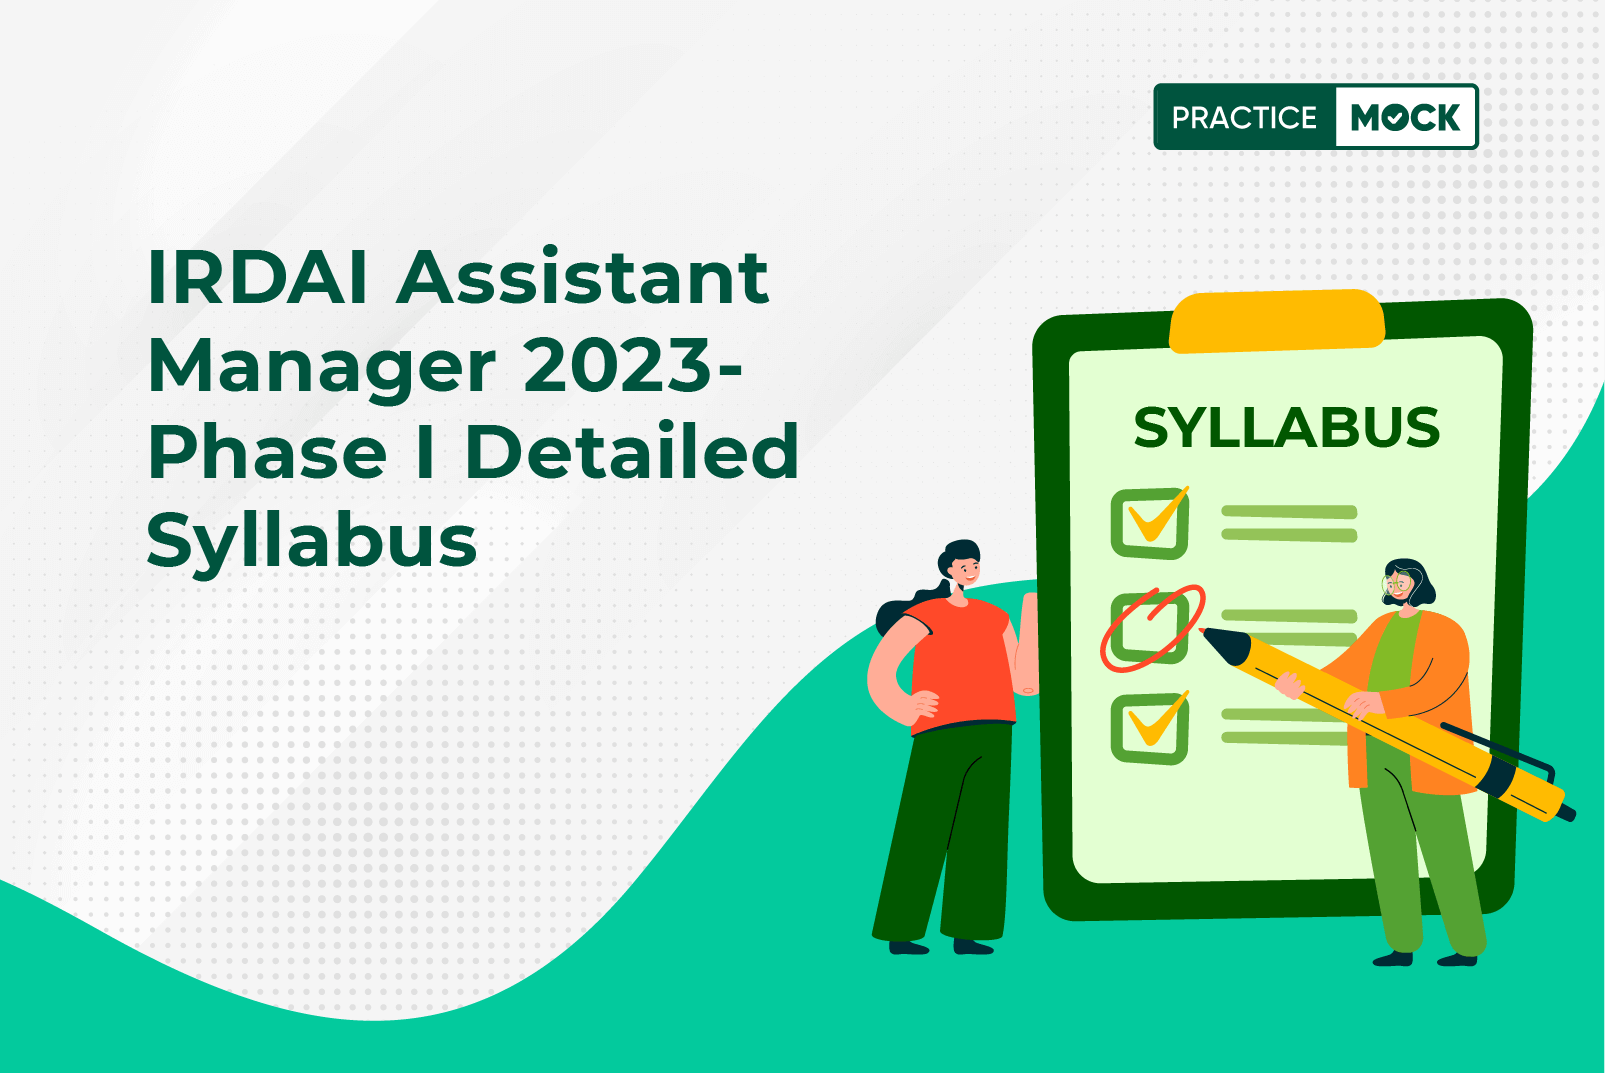 IRDAI Assistant Manager 2023- Phase I Detailed Syllabus